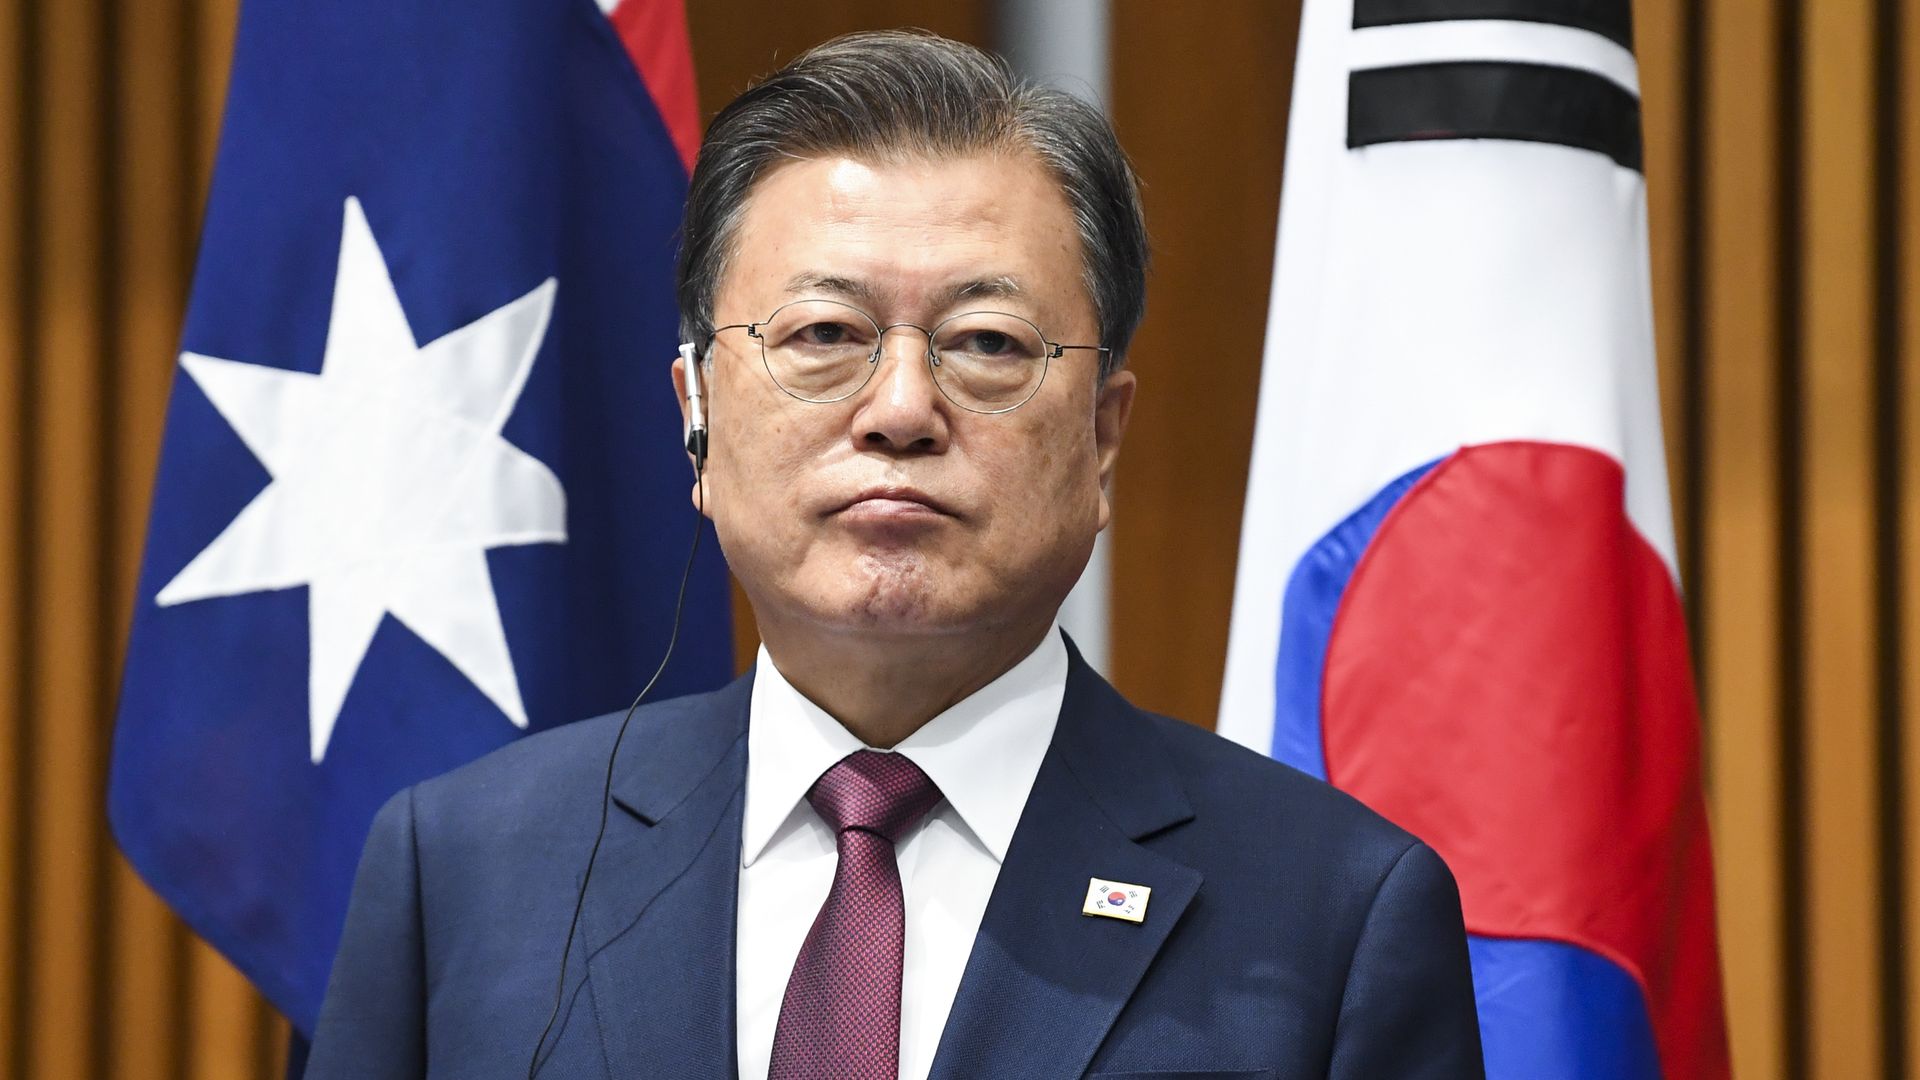 South Korean President Moon Jae-in witnesses a signing ceremony at Parliament House on December 13, 2021 in Canberra, Australia. 